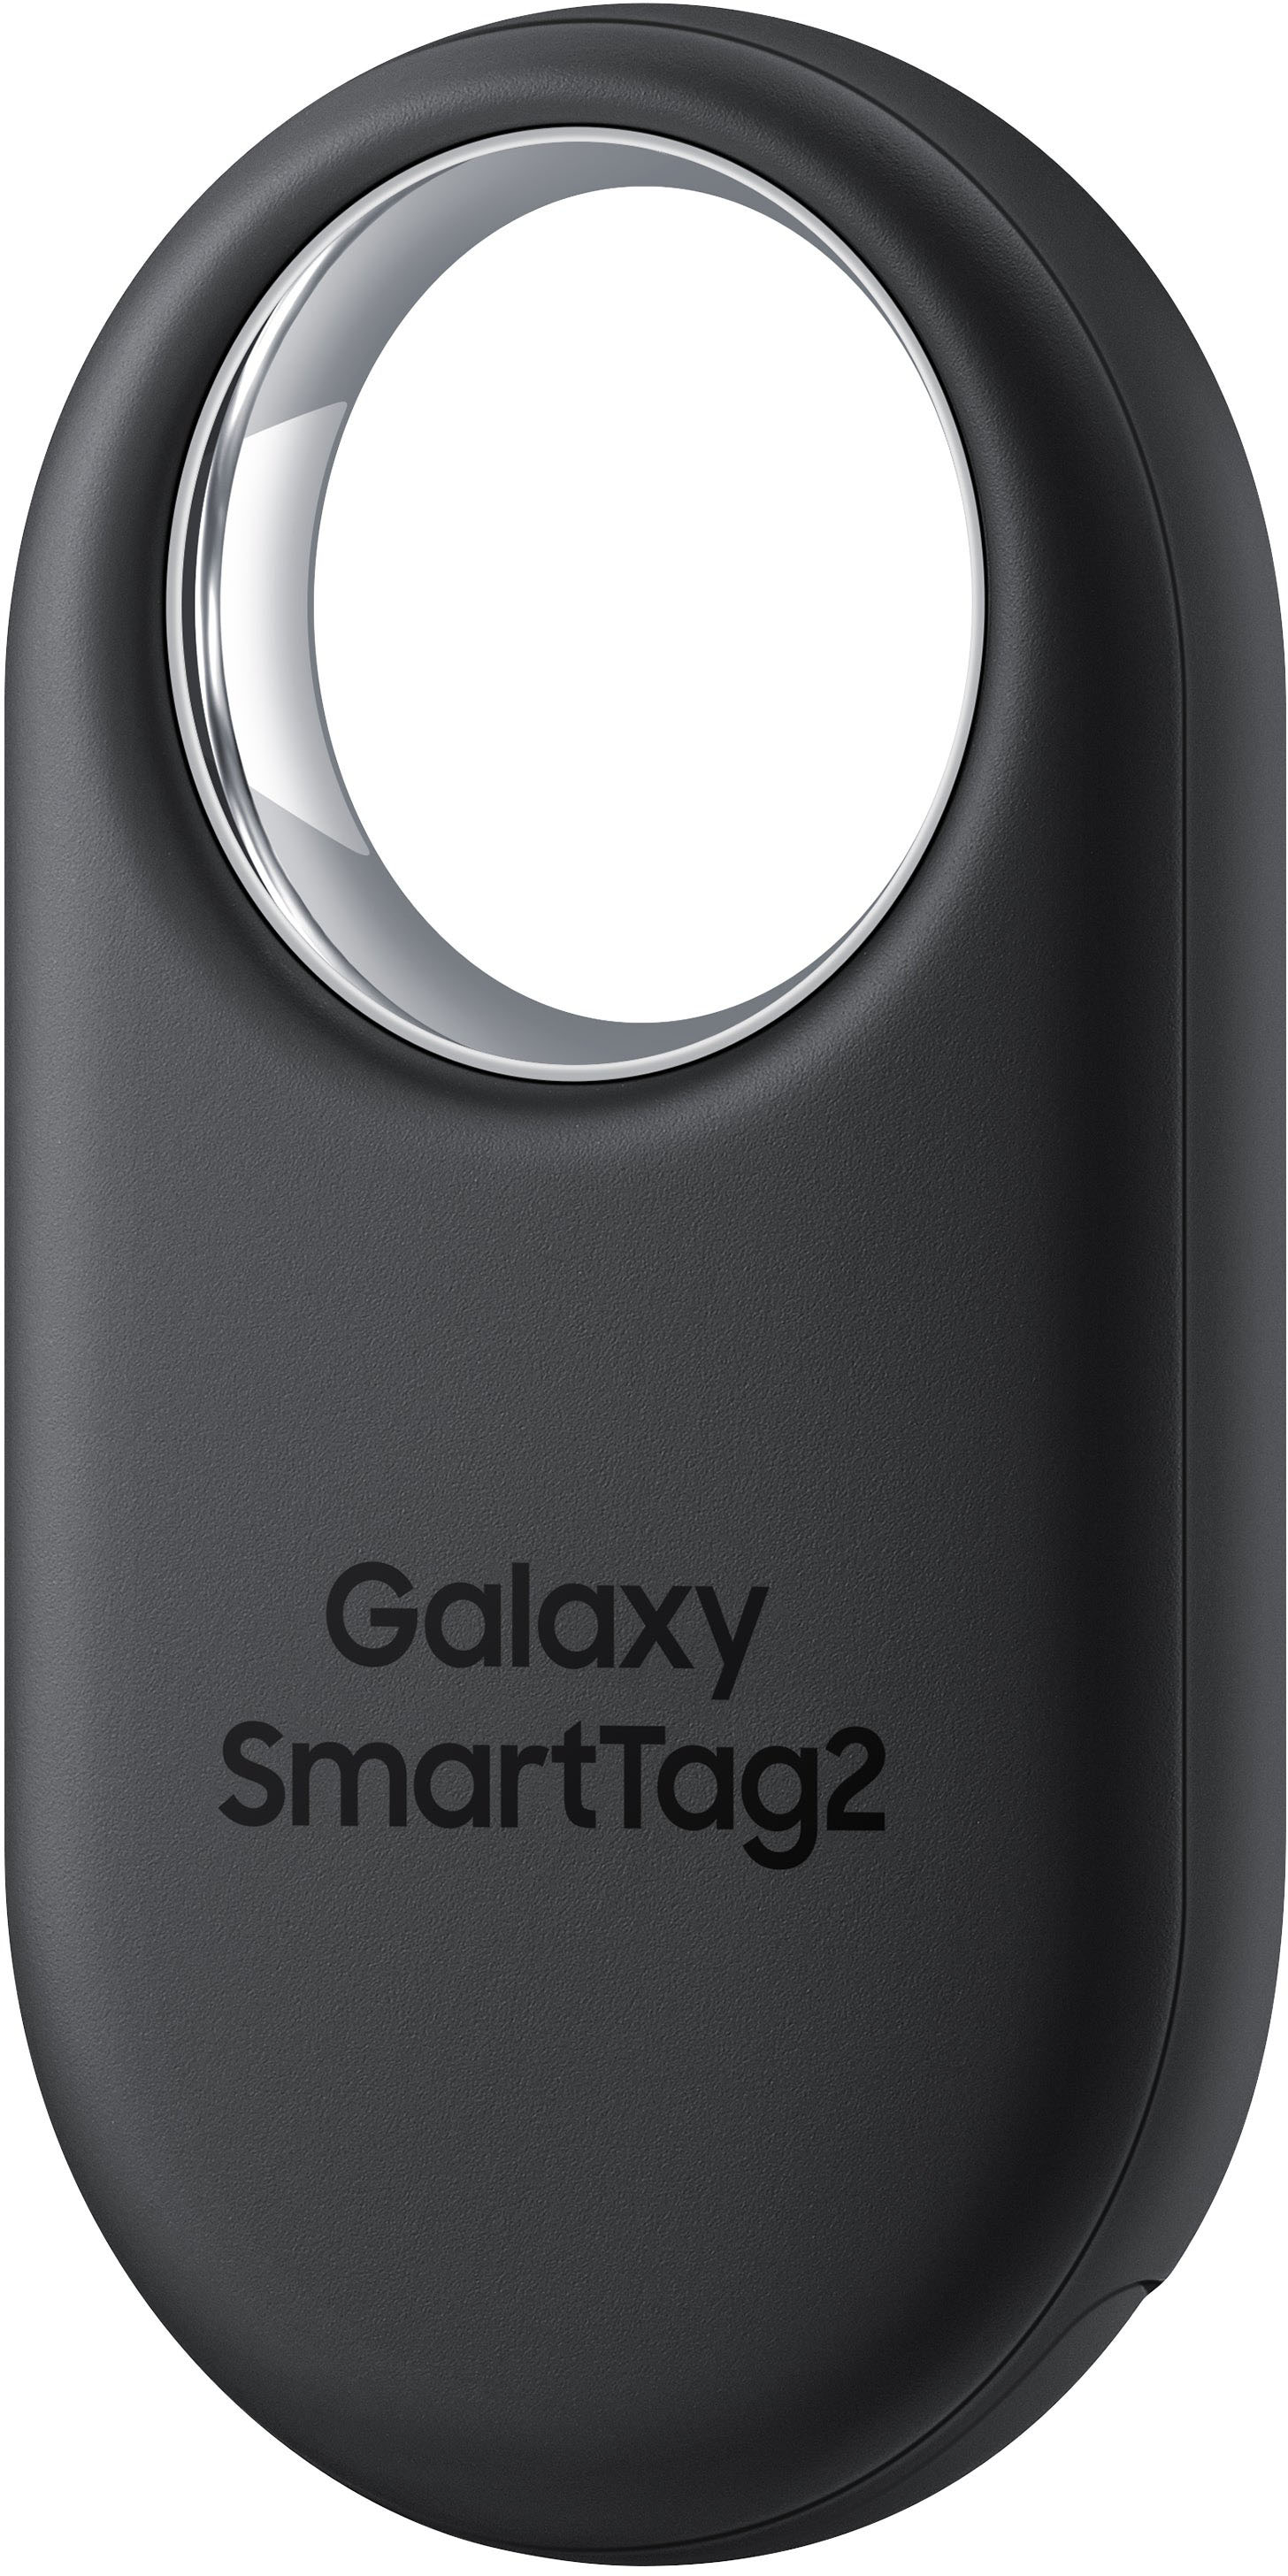 Best Buy's Cyber Monday promotion discounts the Samsung Galaxy SmartTag 2